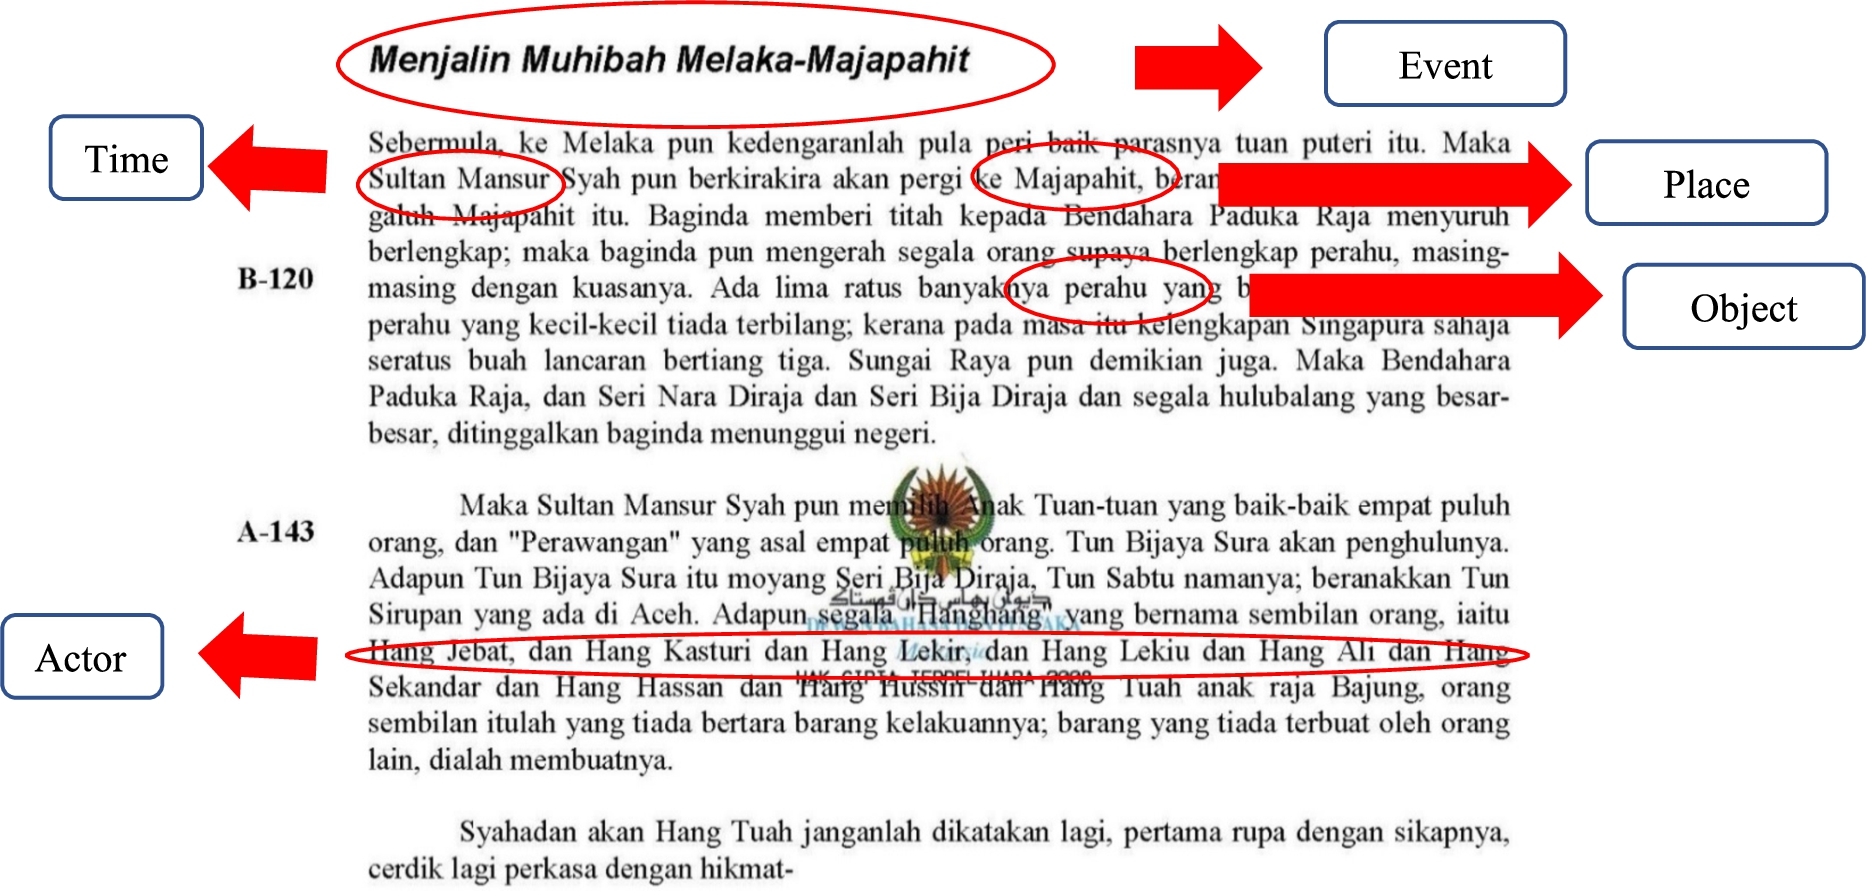 Content extraction of historical Malay manuscripts based on Event 